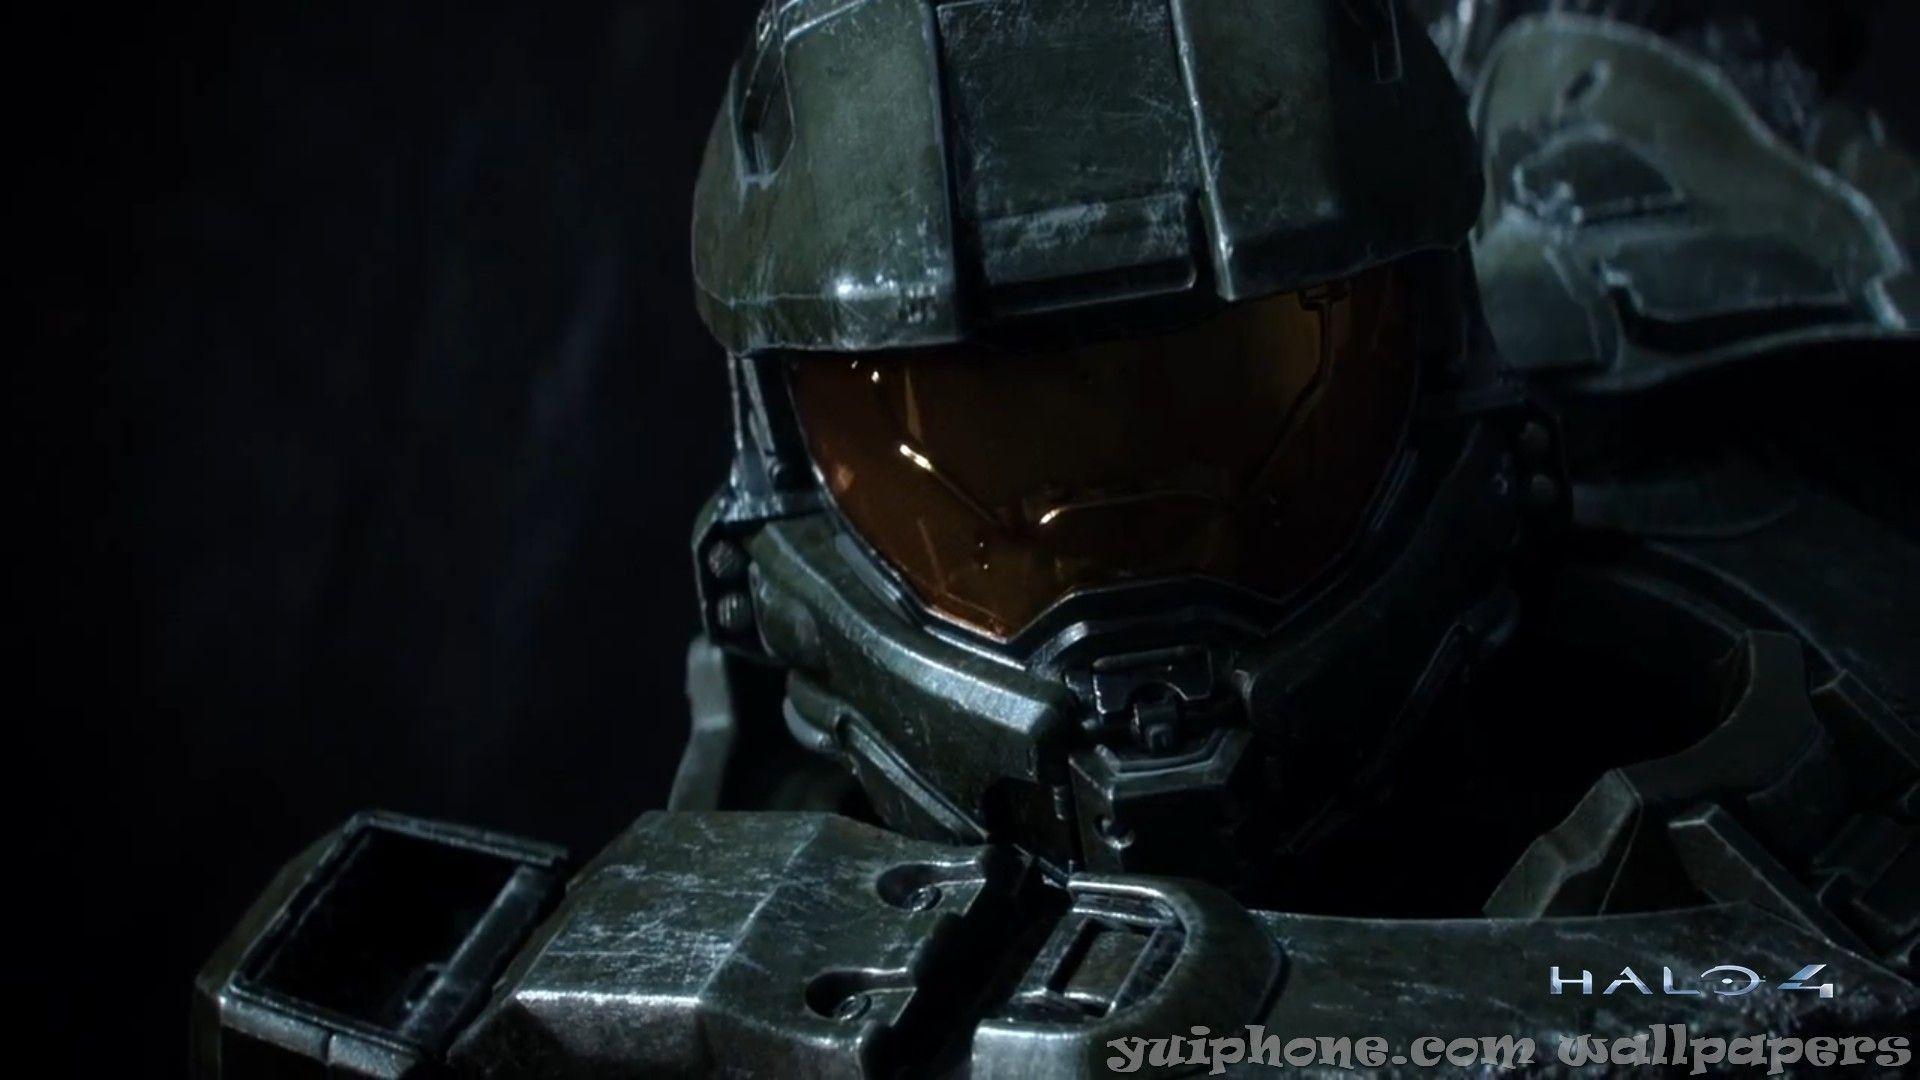 image For > Halo 4 Master Chief Wallpaper